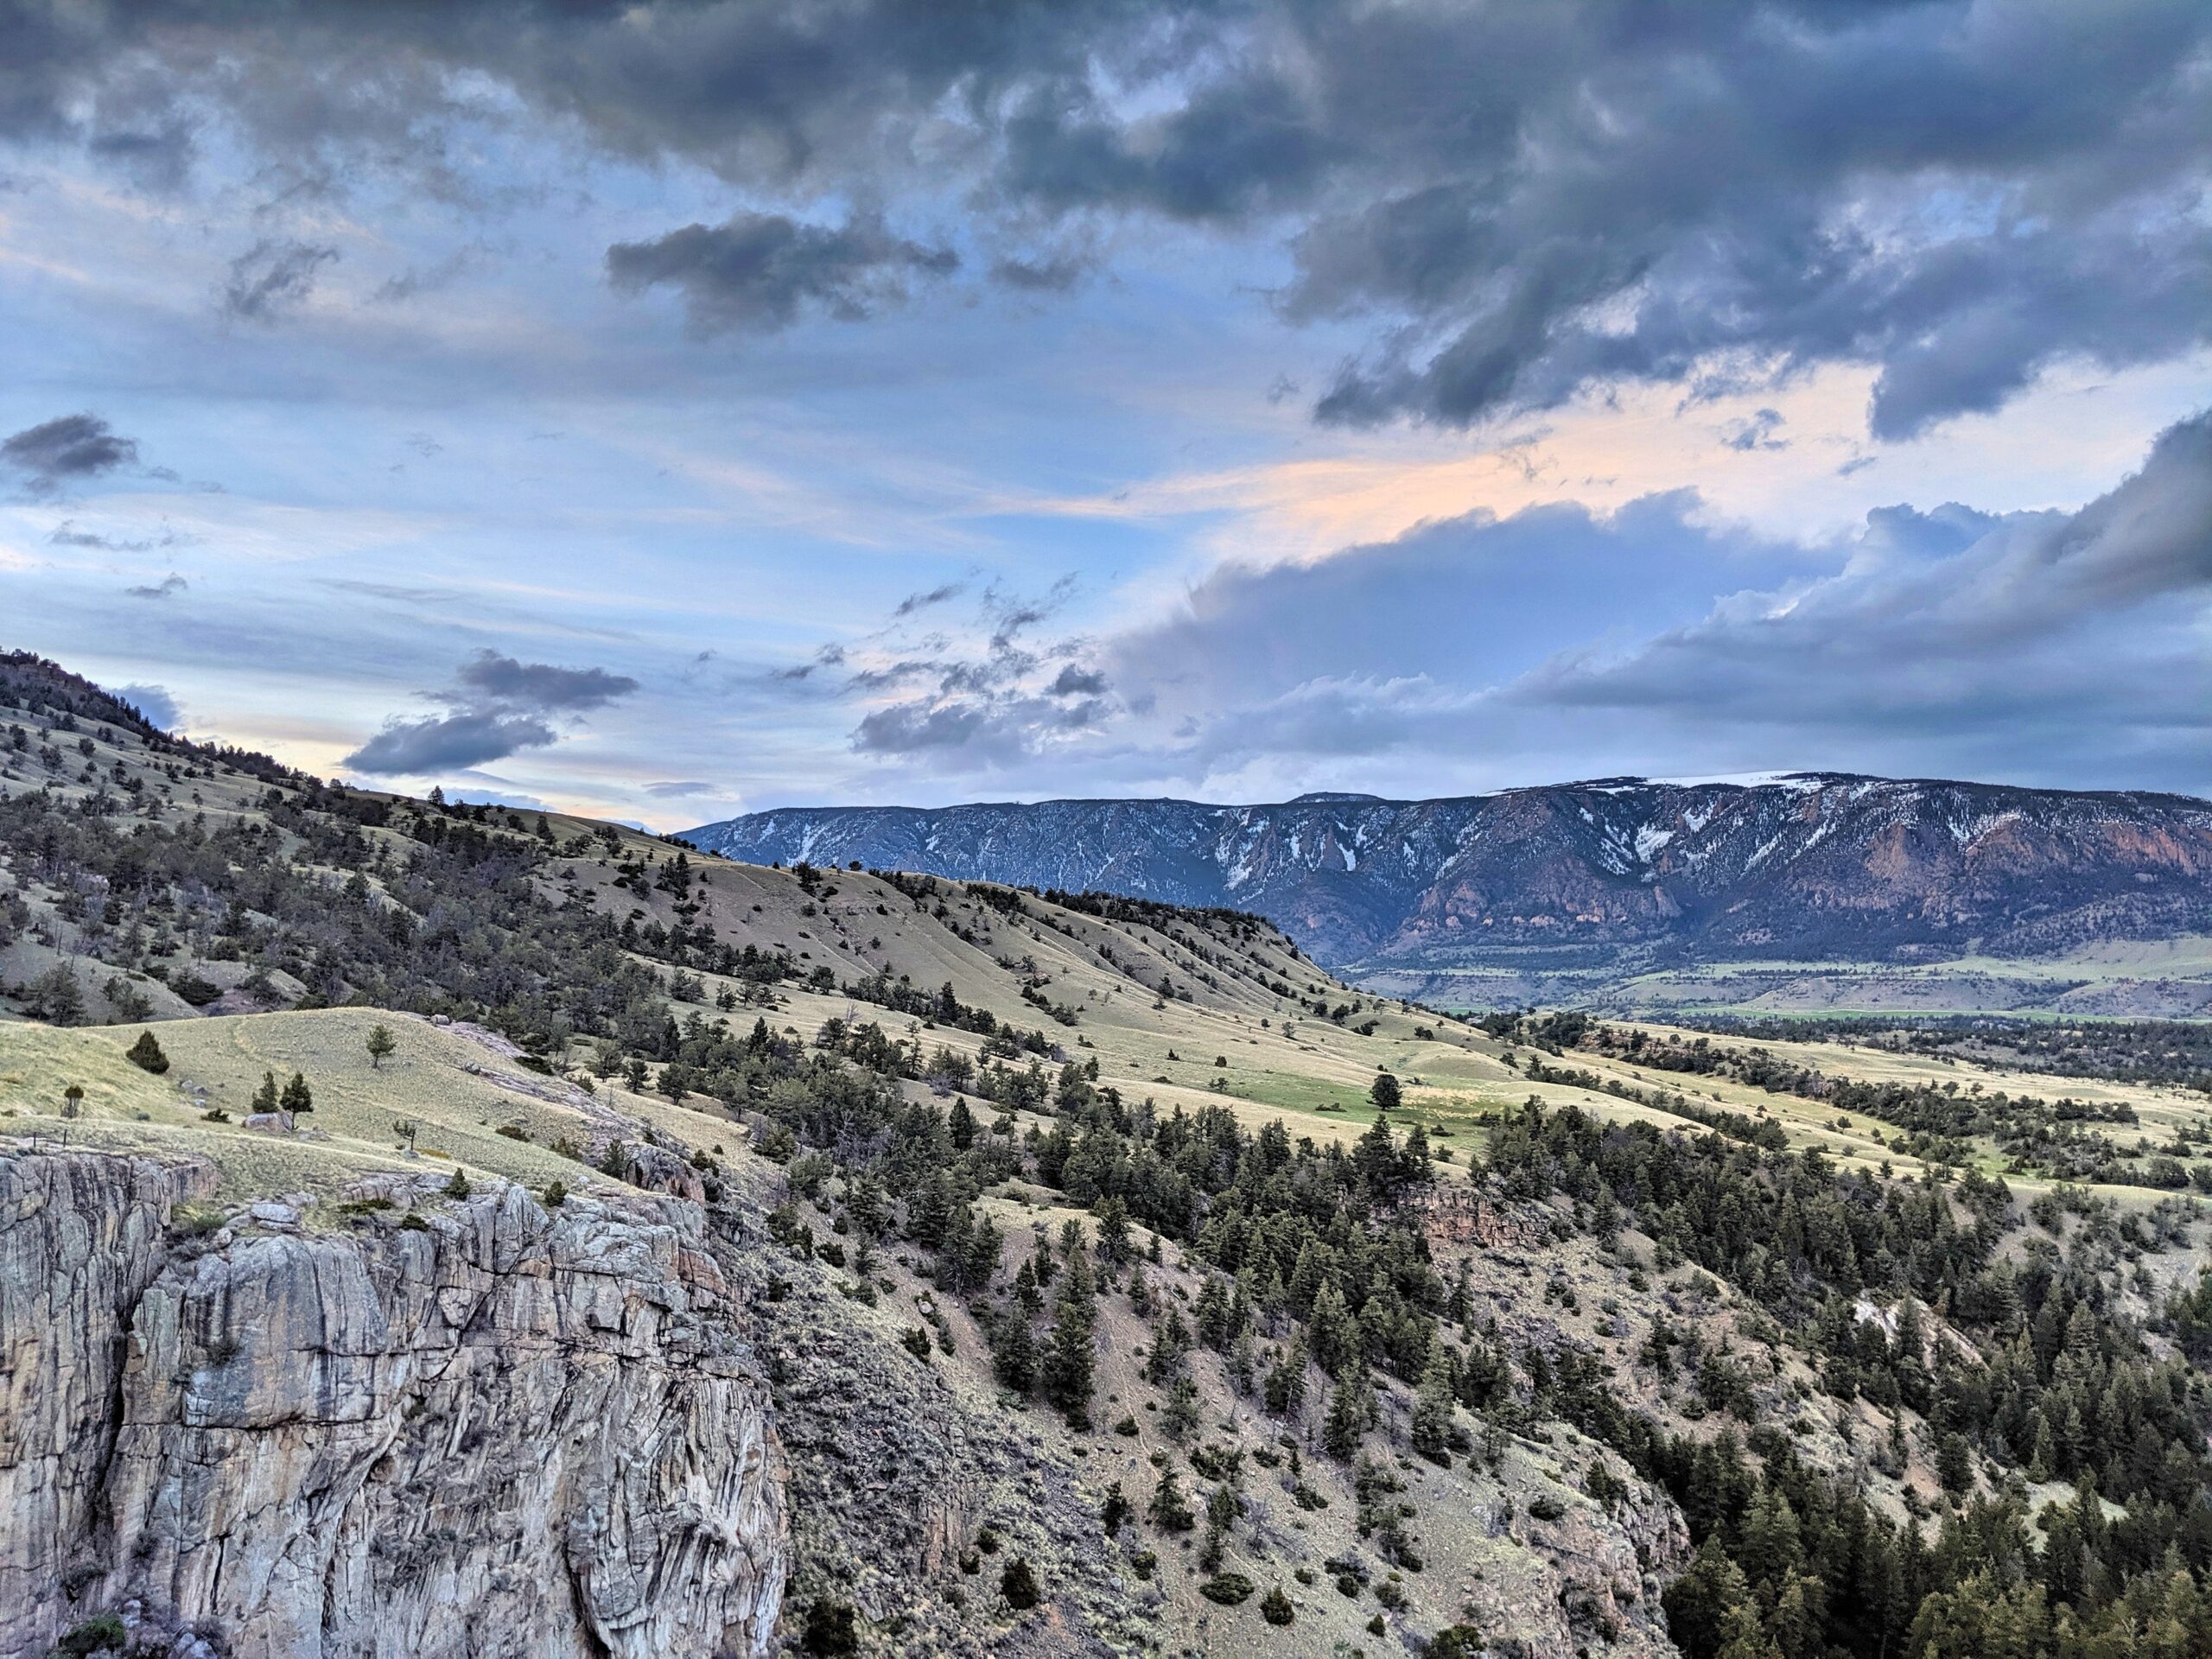 Cody is a small-town in Wyoming with western charm. It's one of the best places in the state of Wyoming to live if you're interested in rodeos and cowboy culture. Pictured: A mountain view of Cody, Wyoming